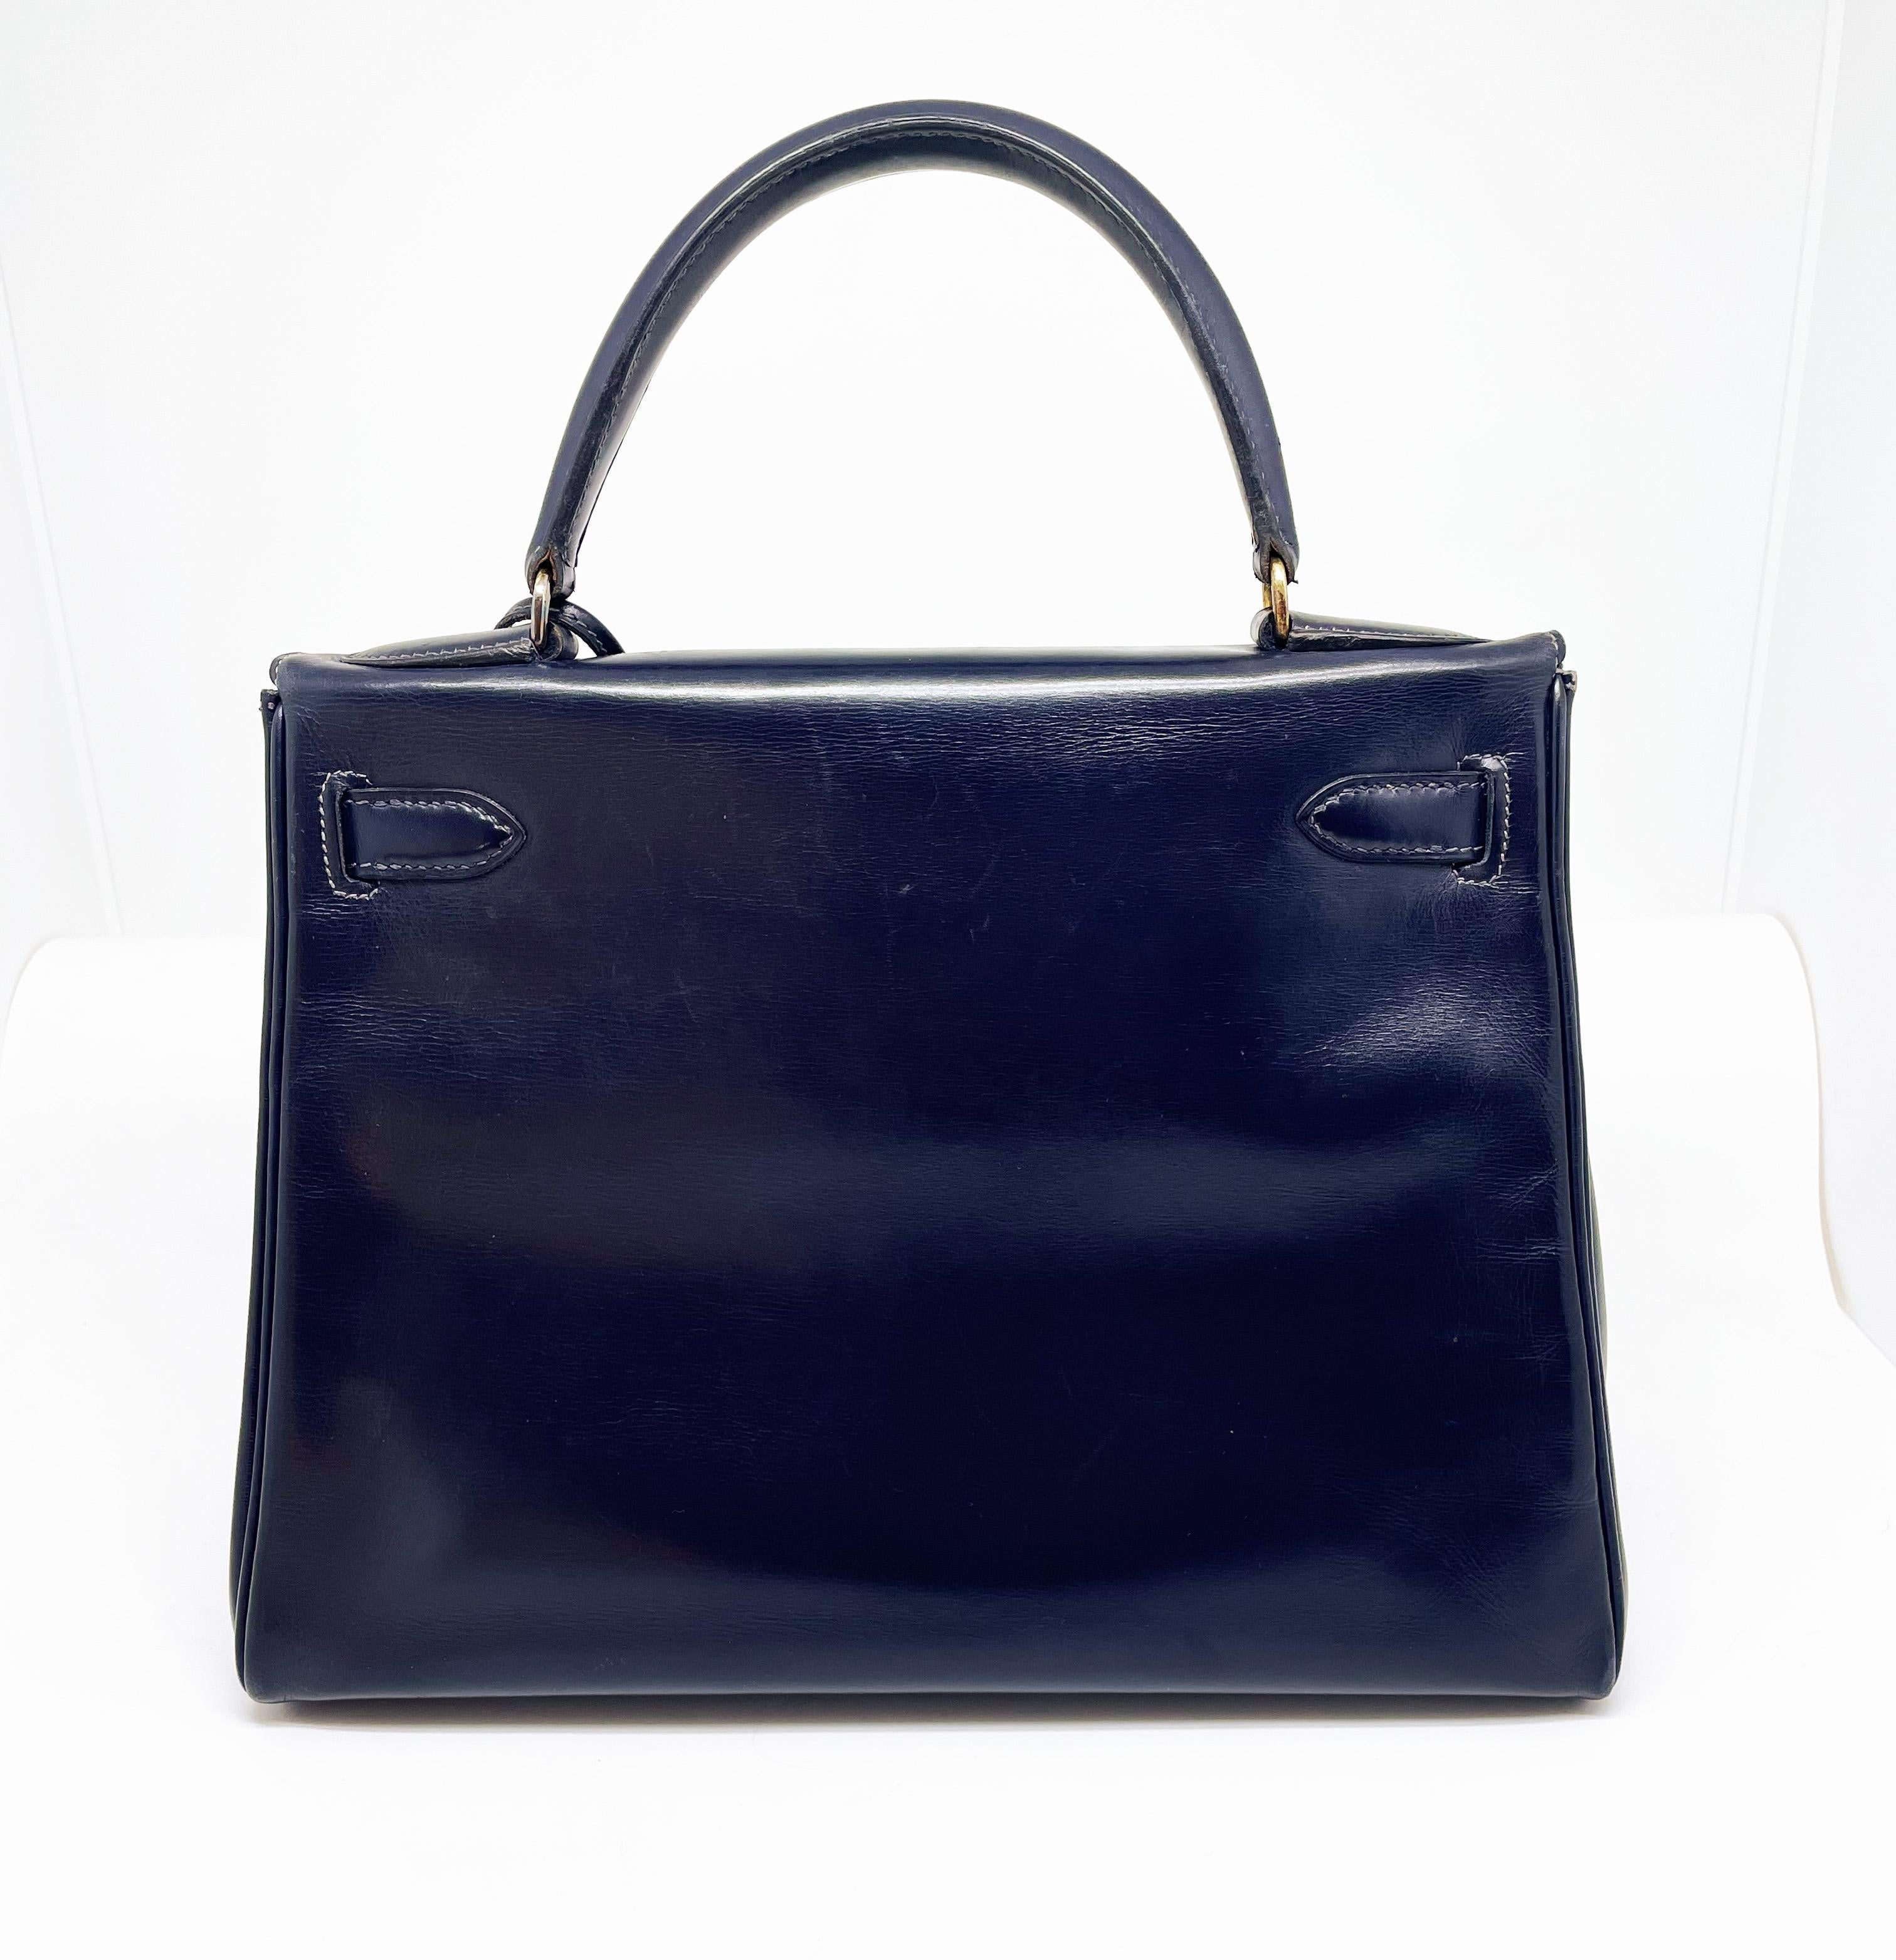 Exceptional Hermès Kelly bag 28 returned in navy box leather 4